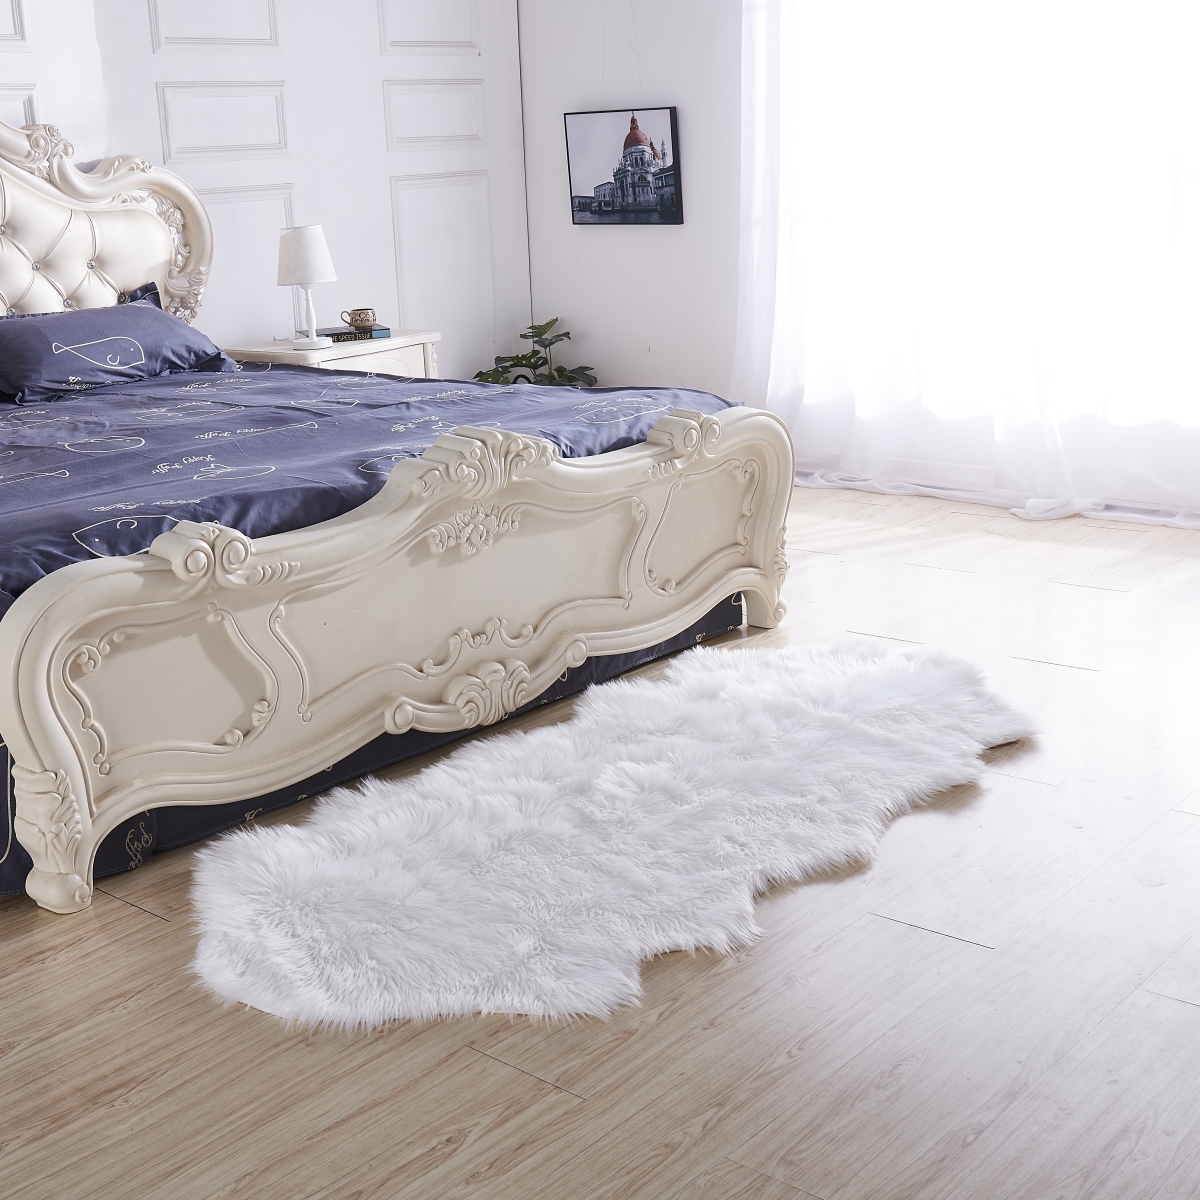 Picture of Amazing Rugs LSW08180 32 x 71-in. Luxury Decorative Hand Tufted Faux Fur Rug in White Sheepskin